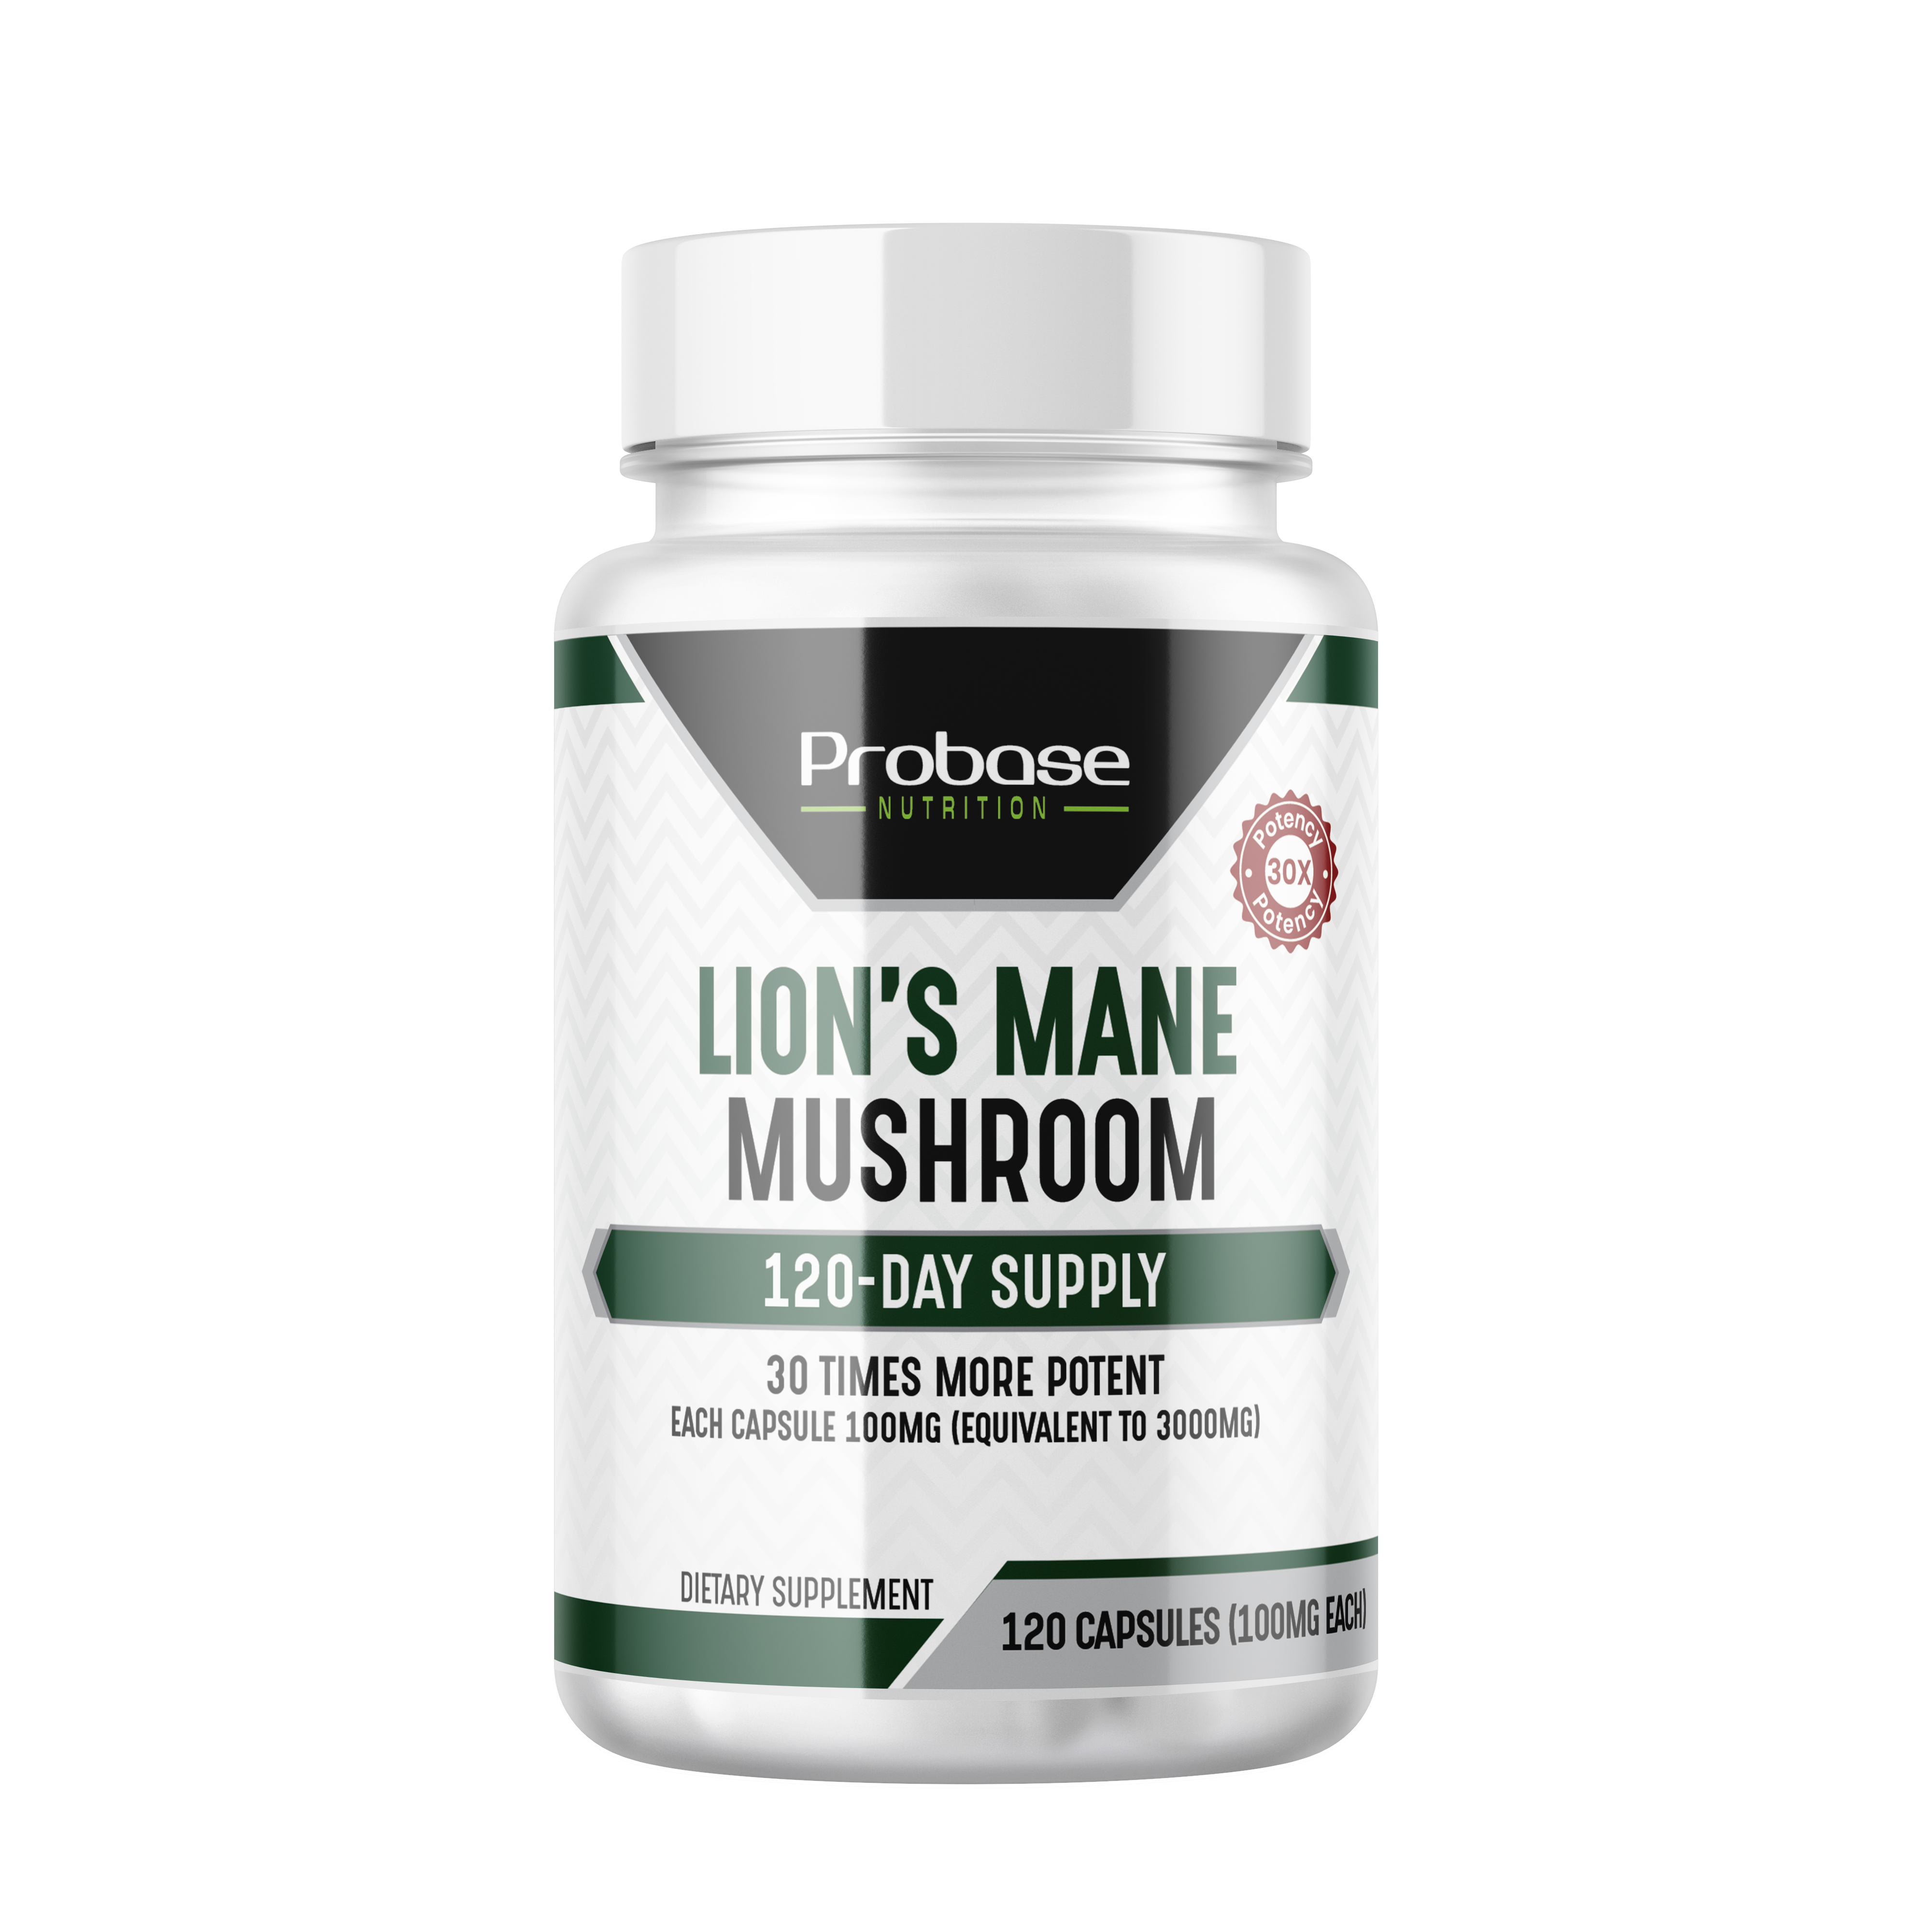 Roar into Wellness: Demystifying the Powerful Lion's Mane Mushroom and Why Probase Takes the Crown